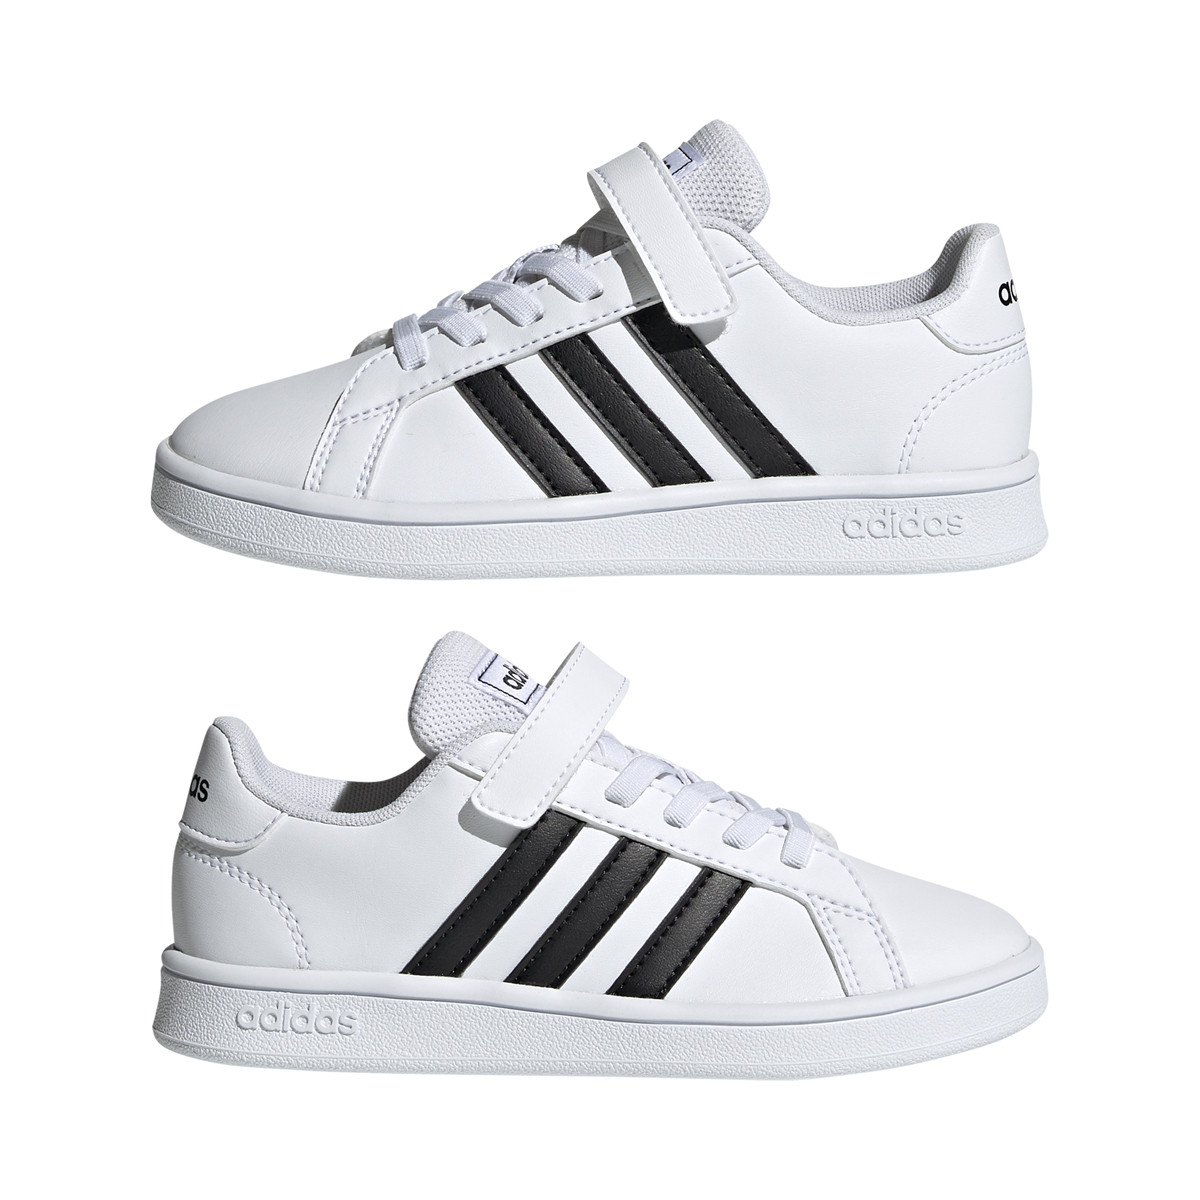 Adidas shoes EF0109 Grand Court C - Alouette Βρεφικά & Παιδικά Ρούχα